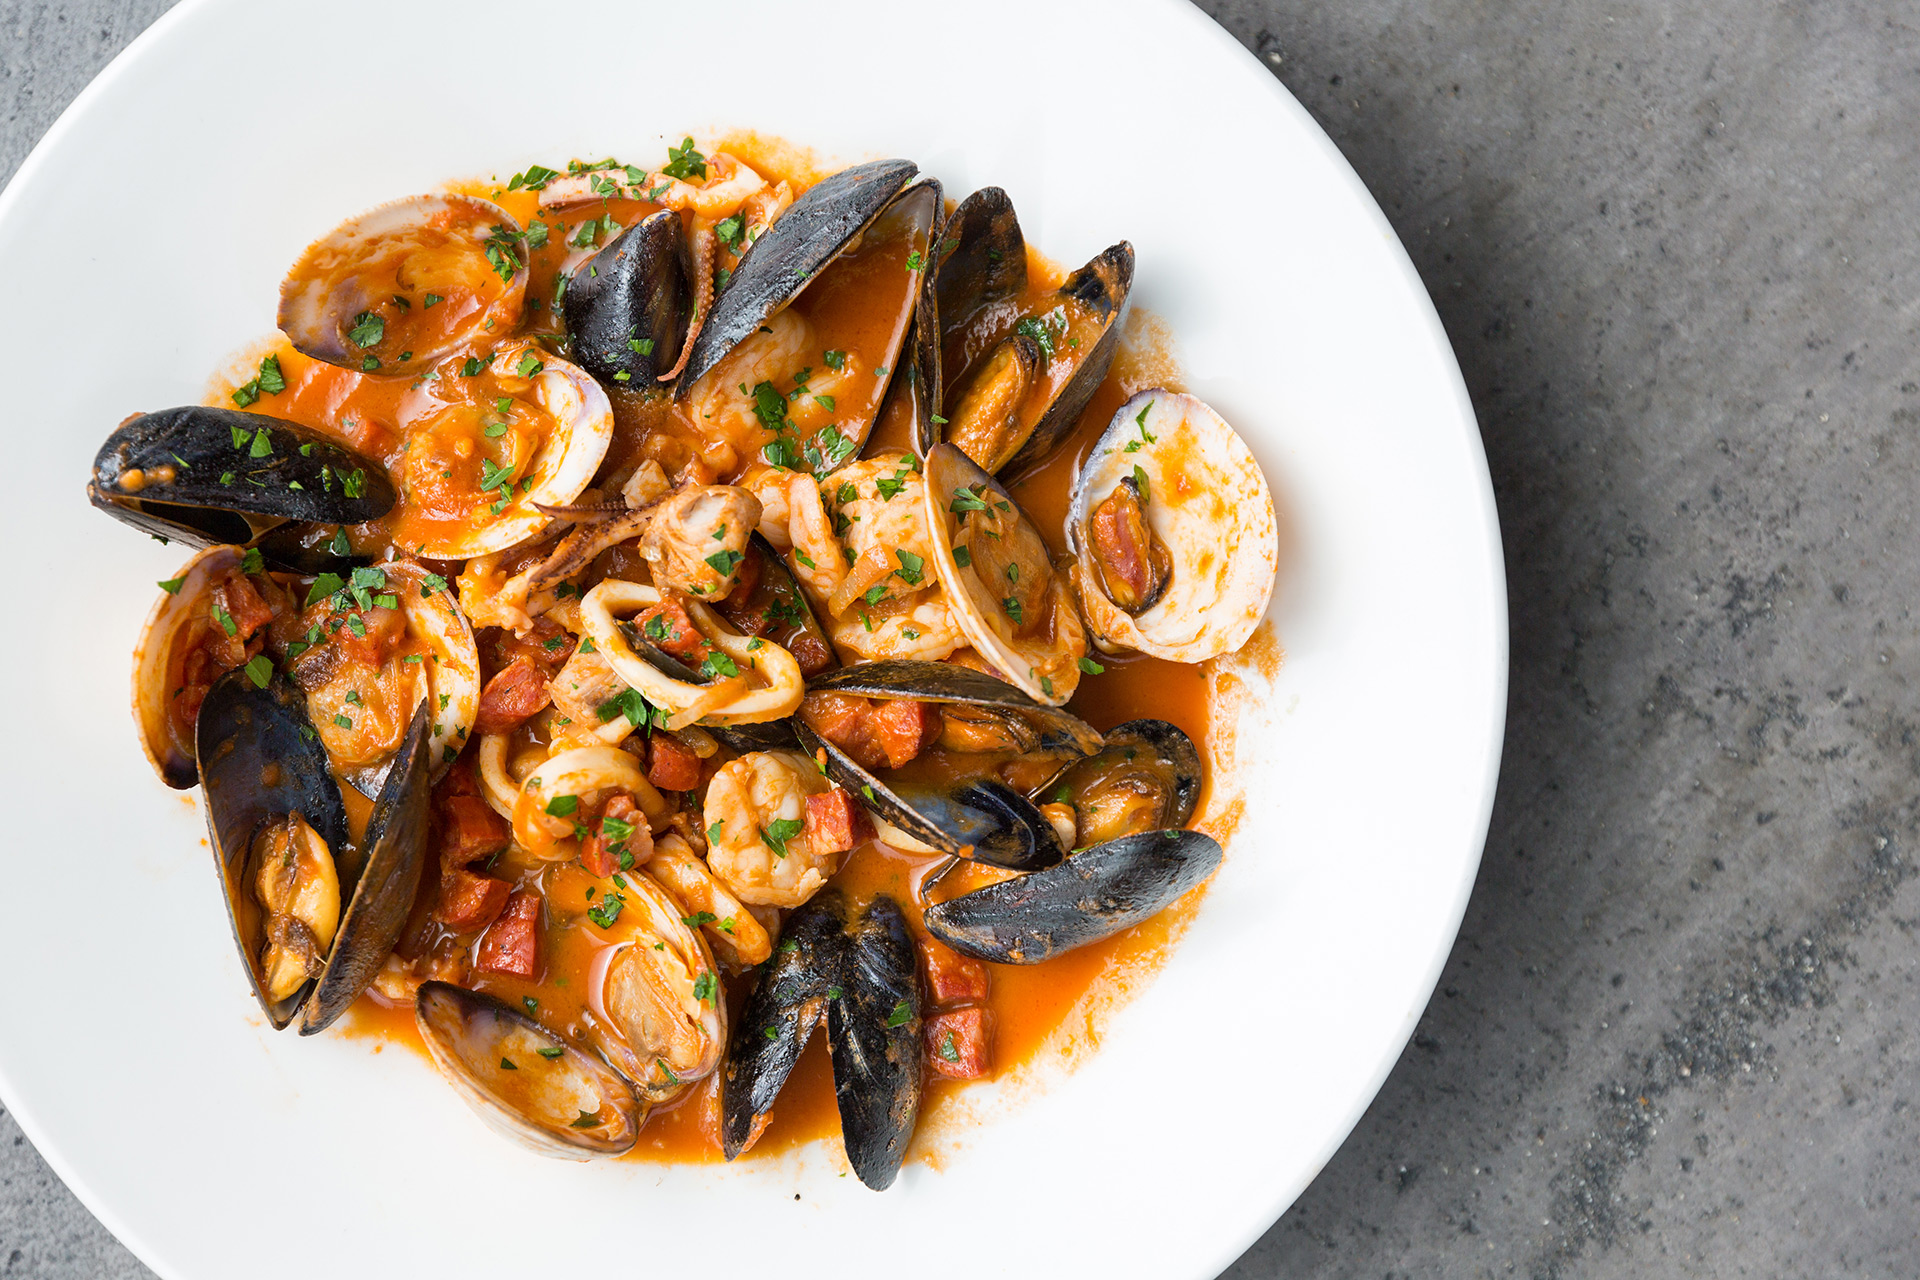 Plate of mussels, clams, shrimp and octopus in red sauce